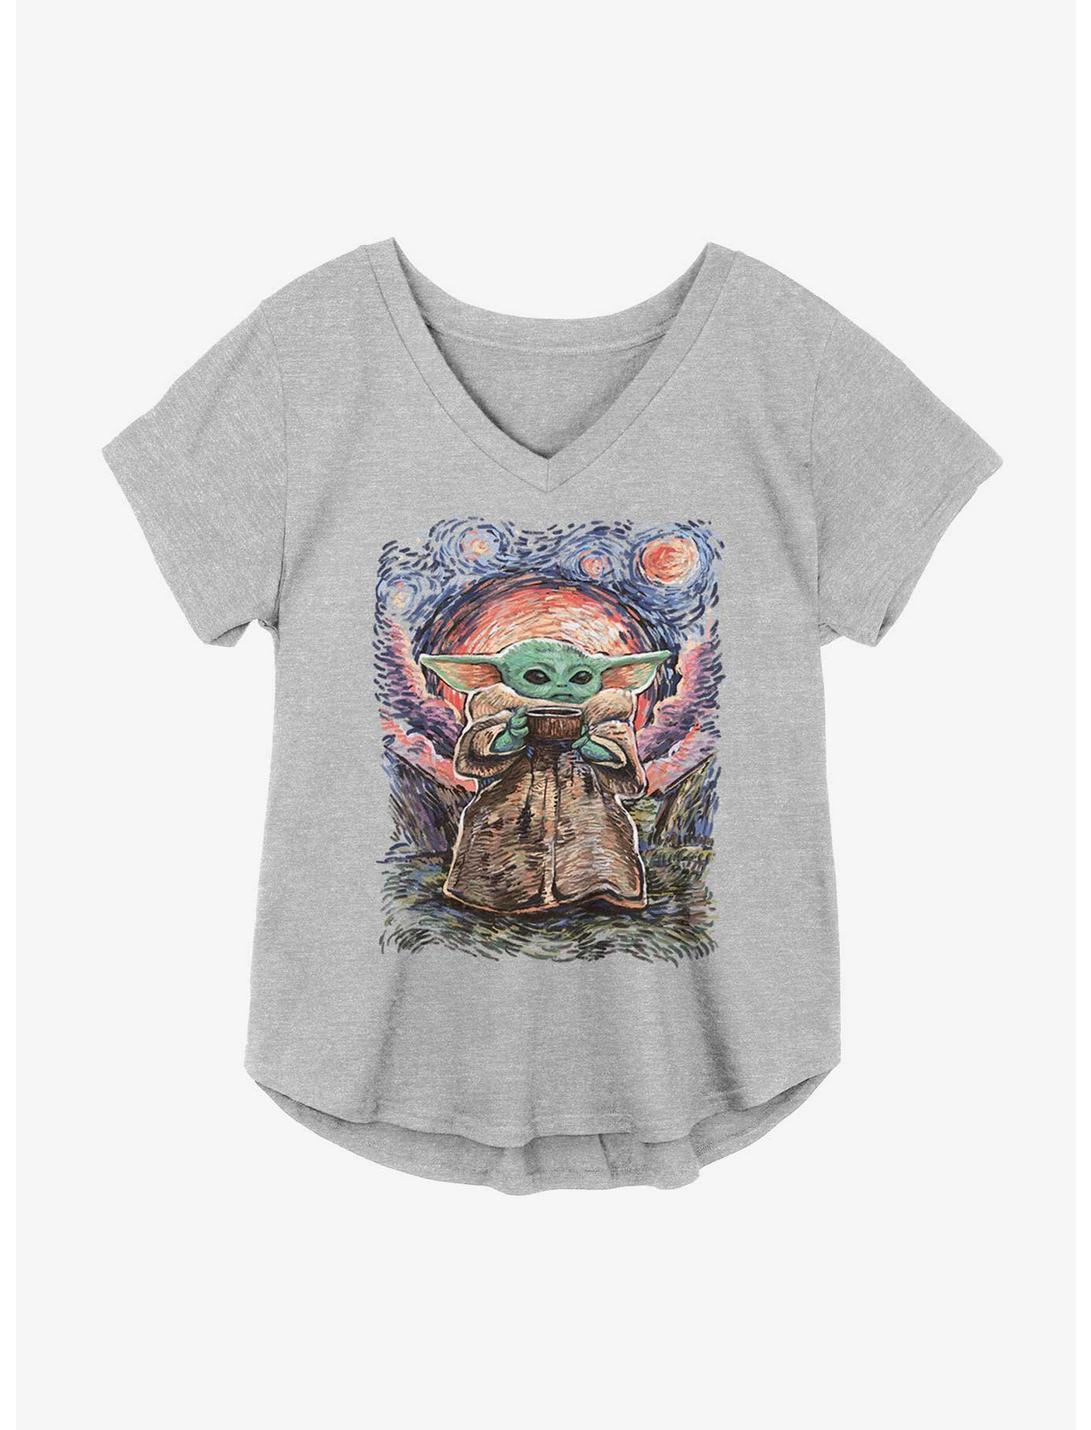 Star Wars The Mandalorian The Child Sipping On Starry Skies Girls Plus Size T-Shirt, HEATHER GR, hi-res